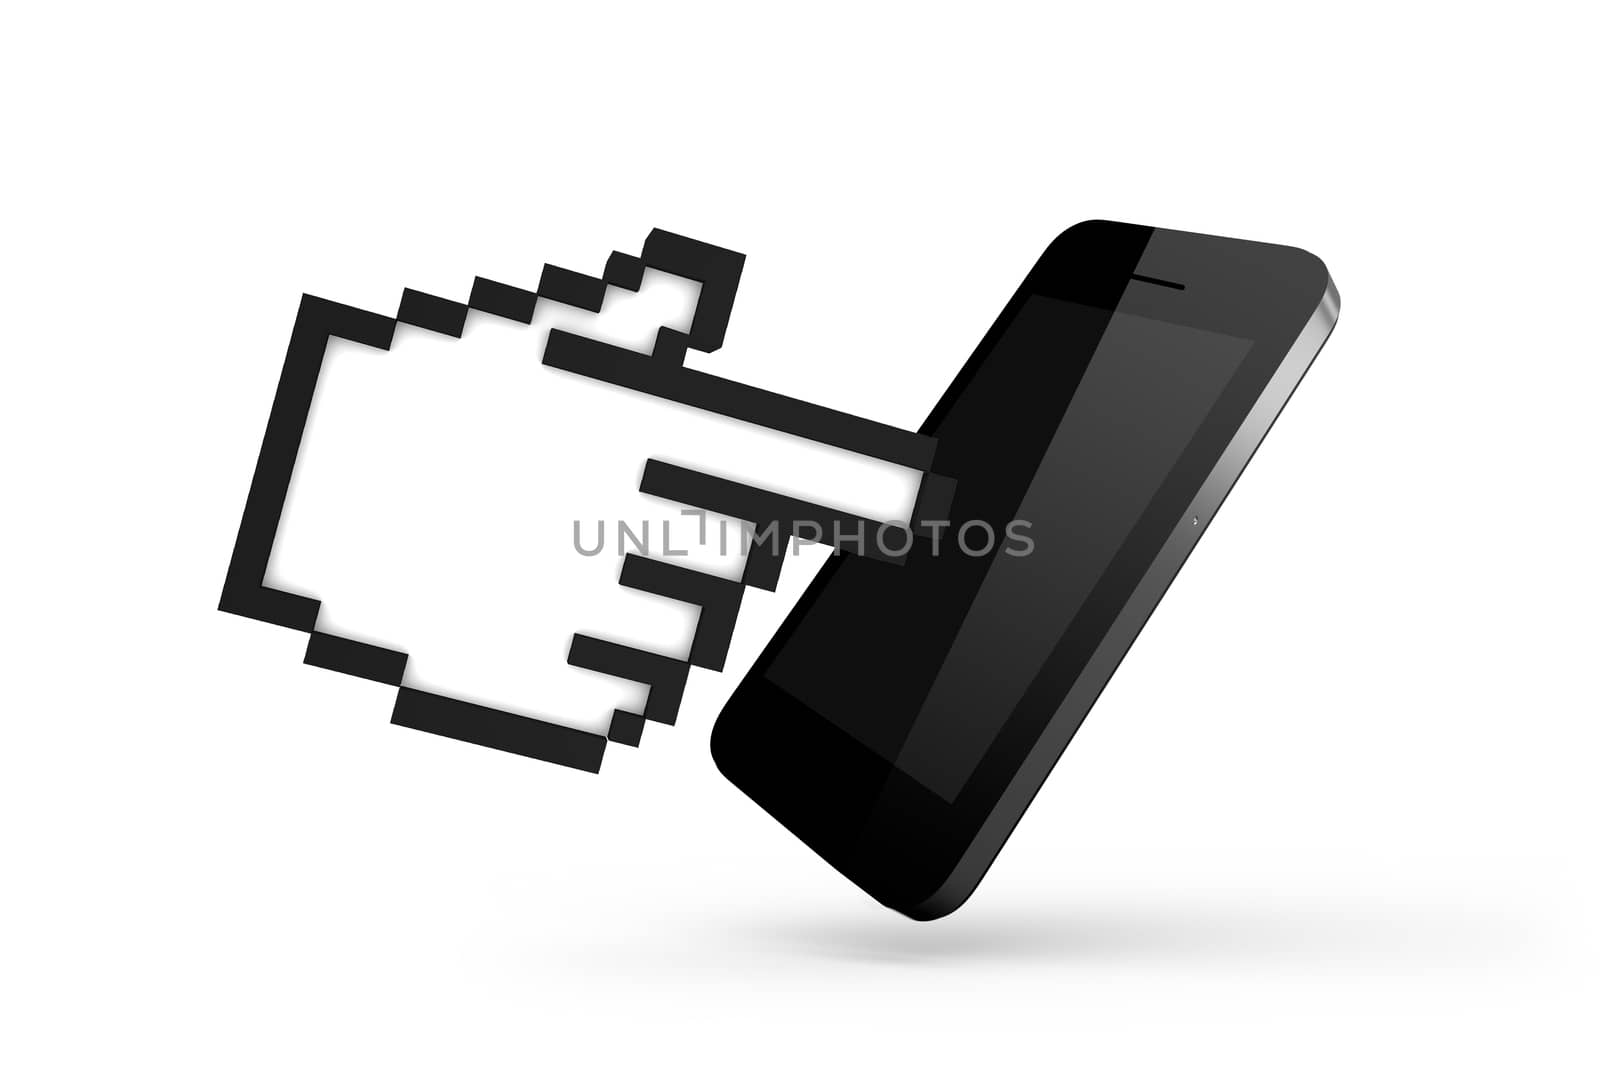 Online shopping concept, computer mouse hand cursor symbol with blank screen smart phone, isolated on white background.